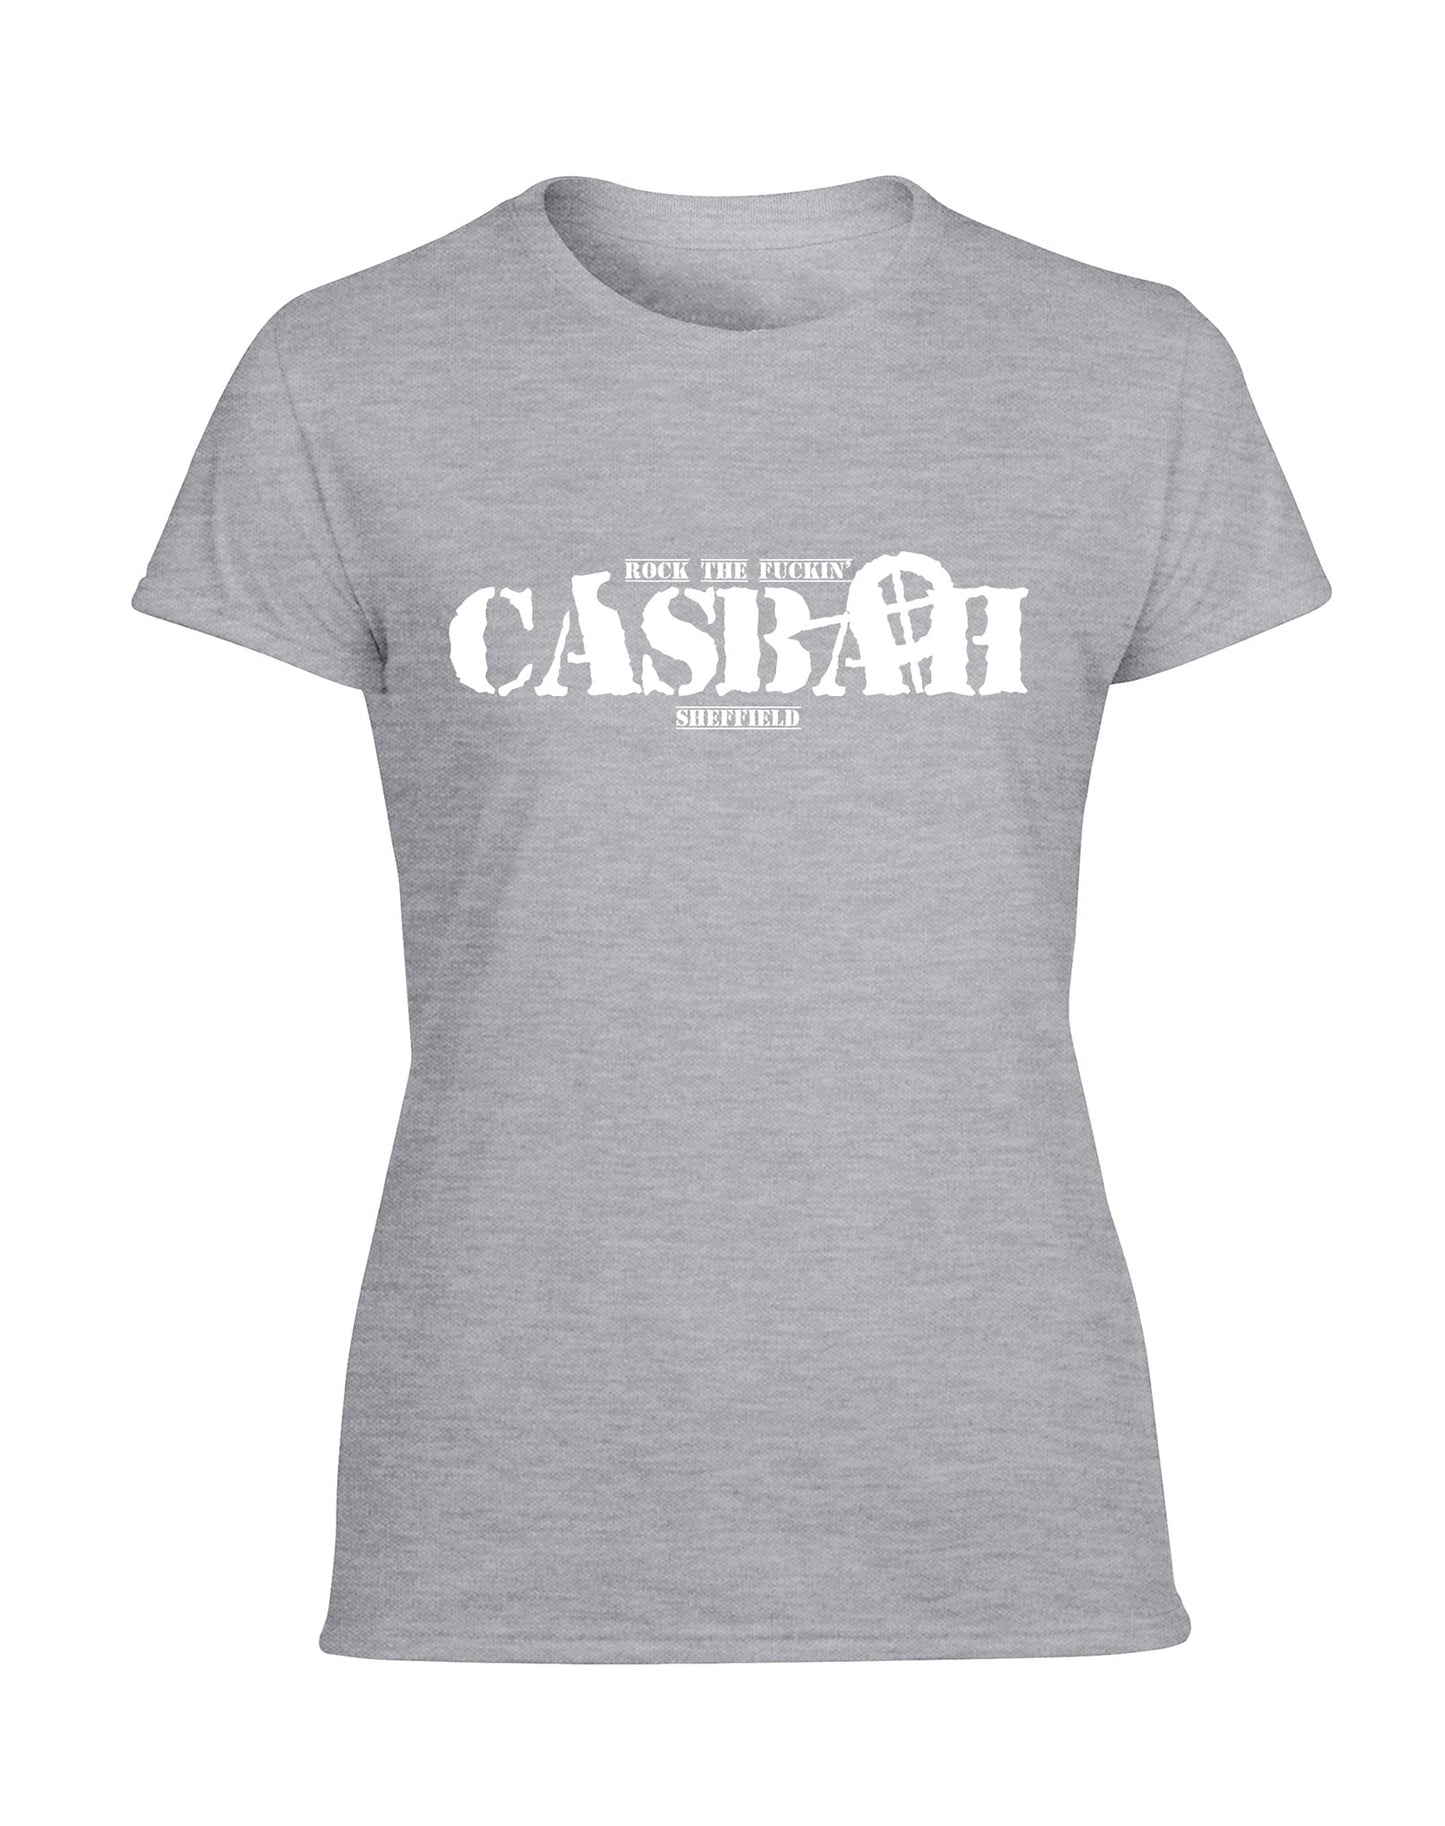 Casbah ladies fit T-shirt - various colours - Dirty Stop Outs